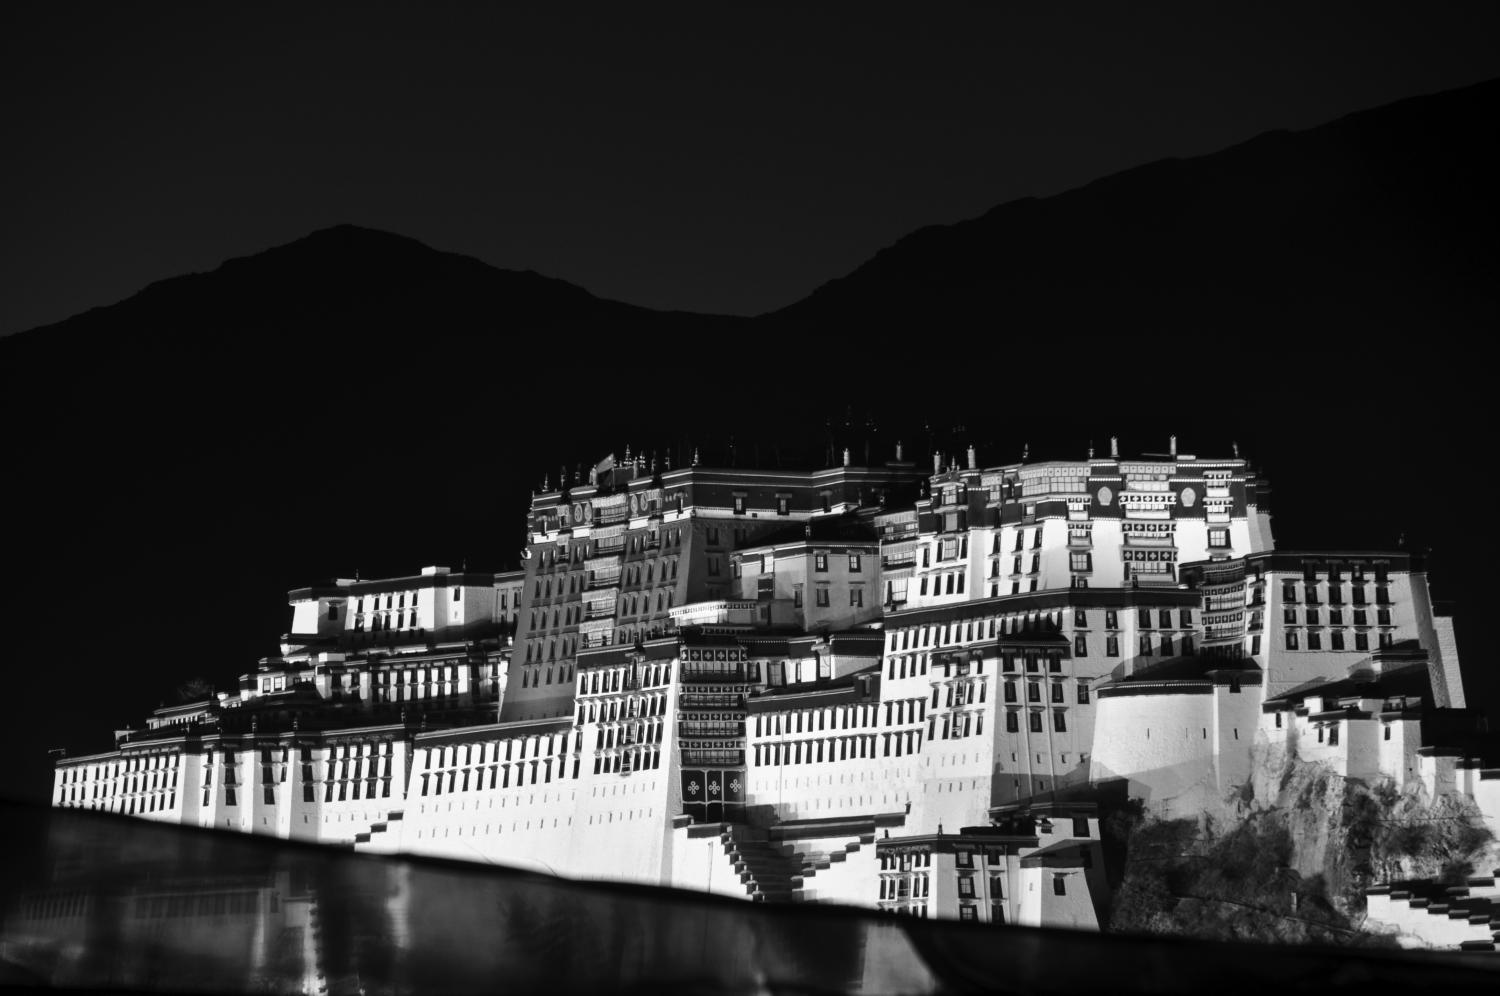 In+Lhasa%2C+the+capital+of+Tibet%2C+the+Potala+Palace+stands+as+a+monument+to+Tibetan+Buddhist+practices%2C+despite+the+current+Chinese+occupation+and+suppression+of+traditional+religion+and+culture.